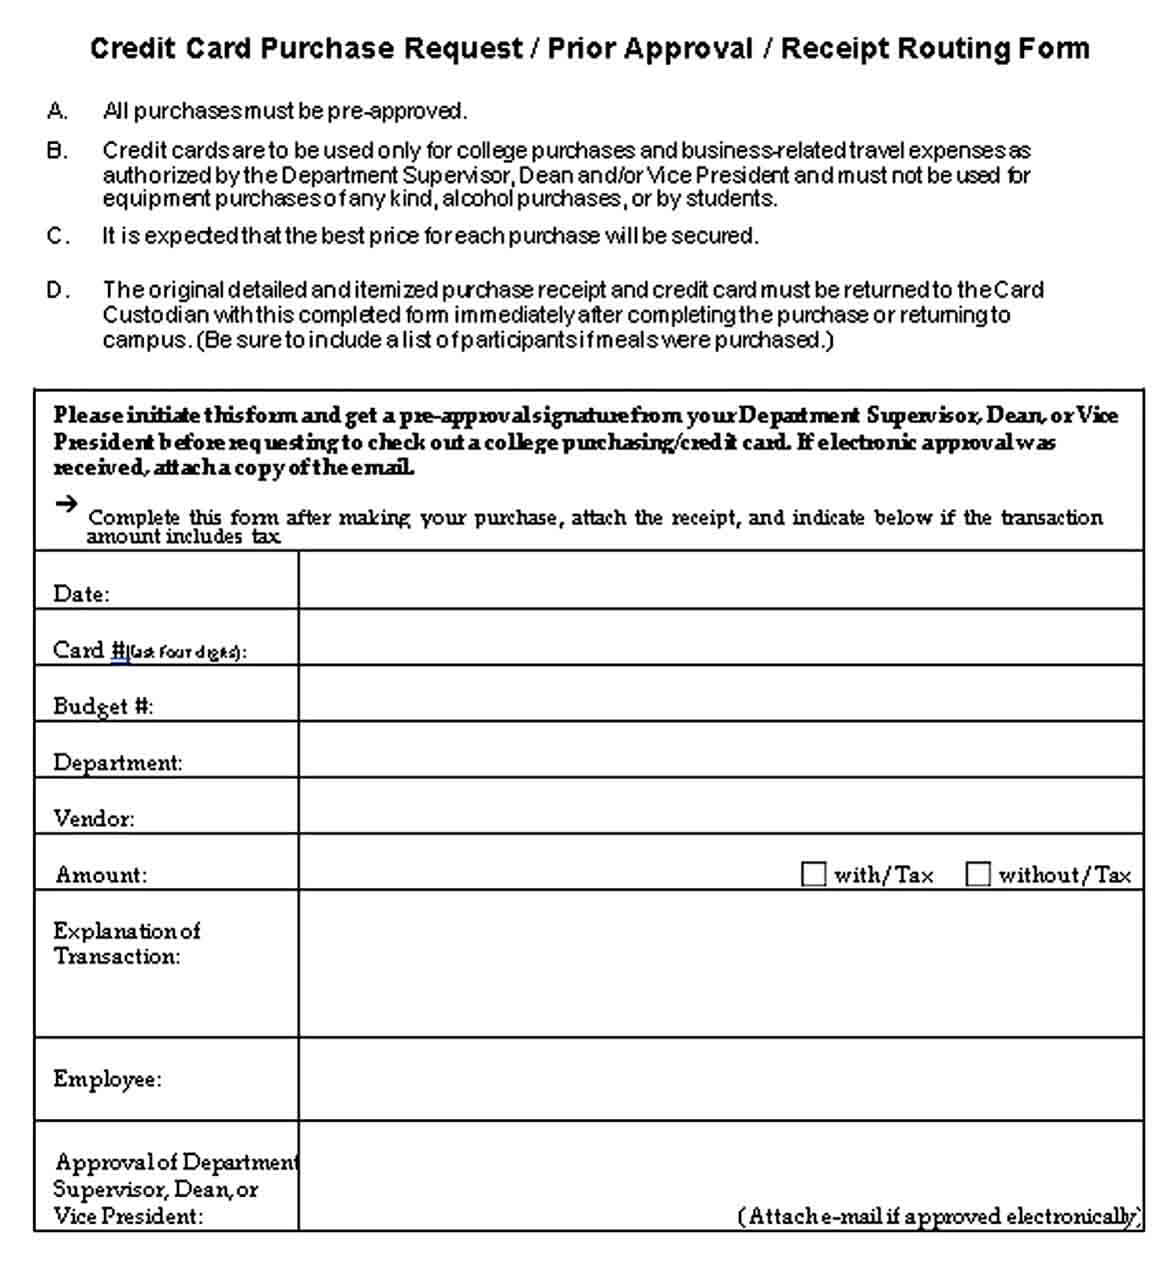 Credit Card Purchase Receipt Form 1